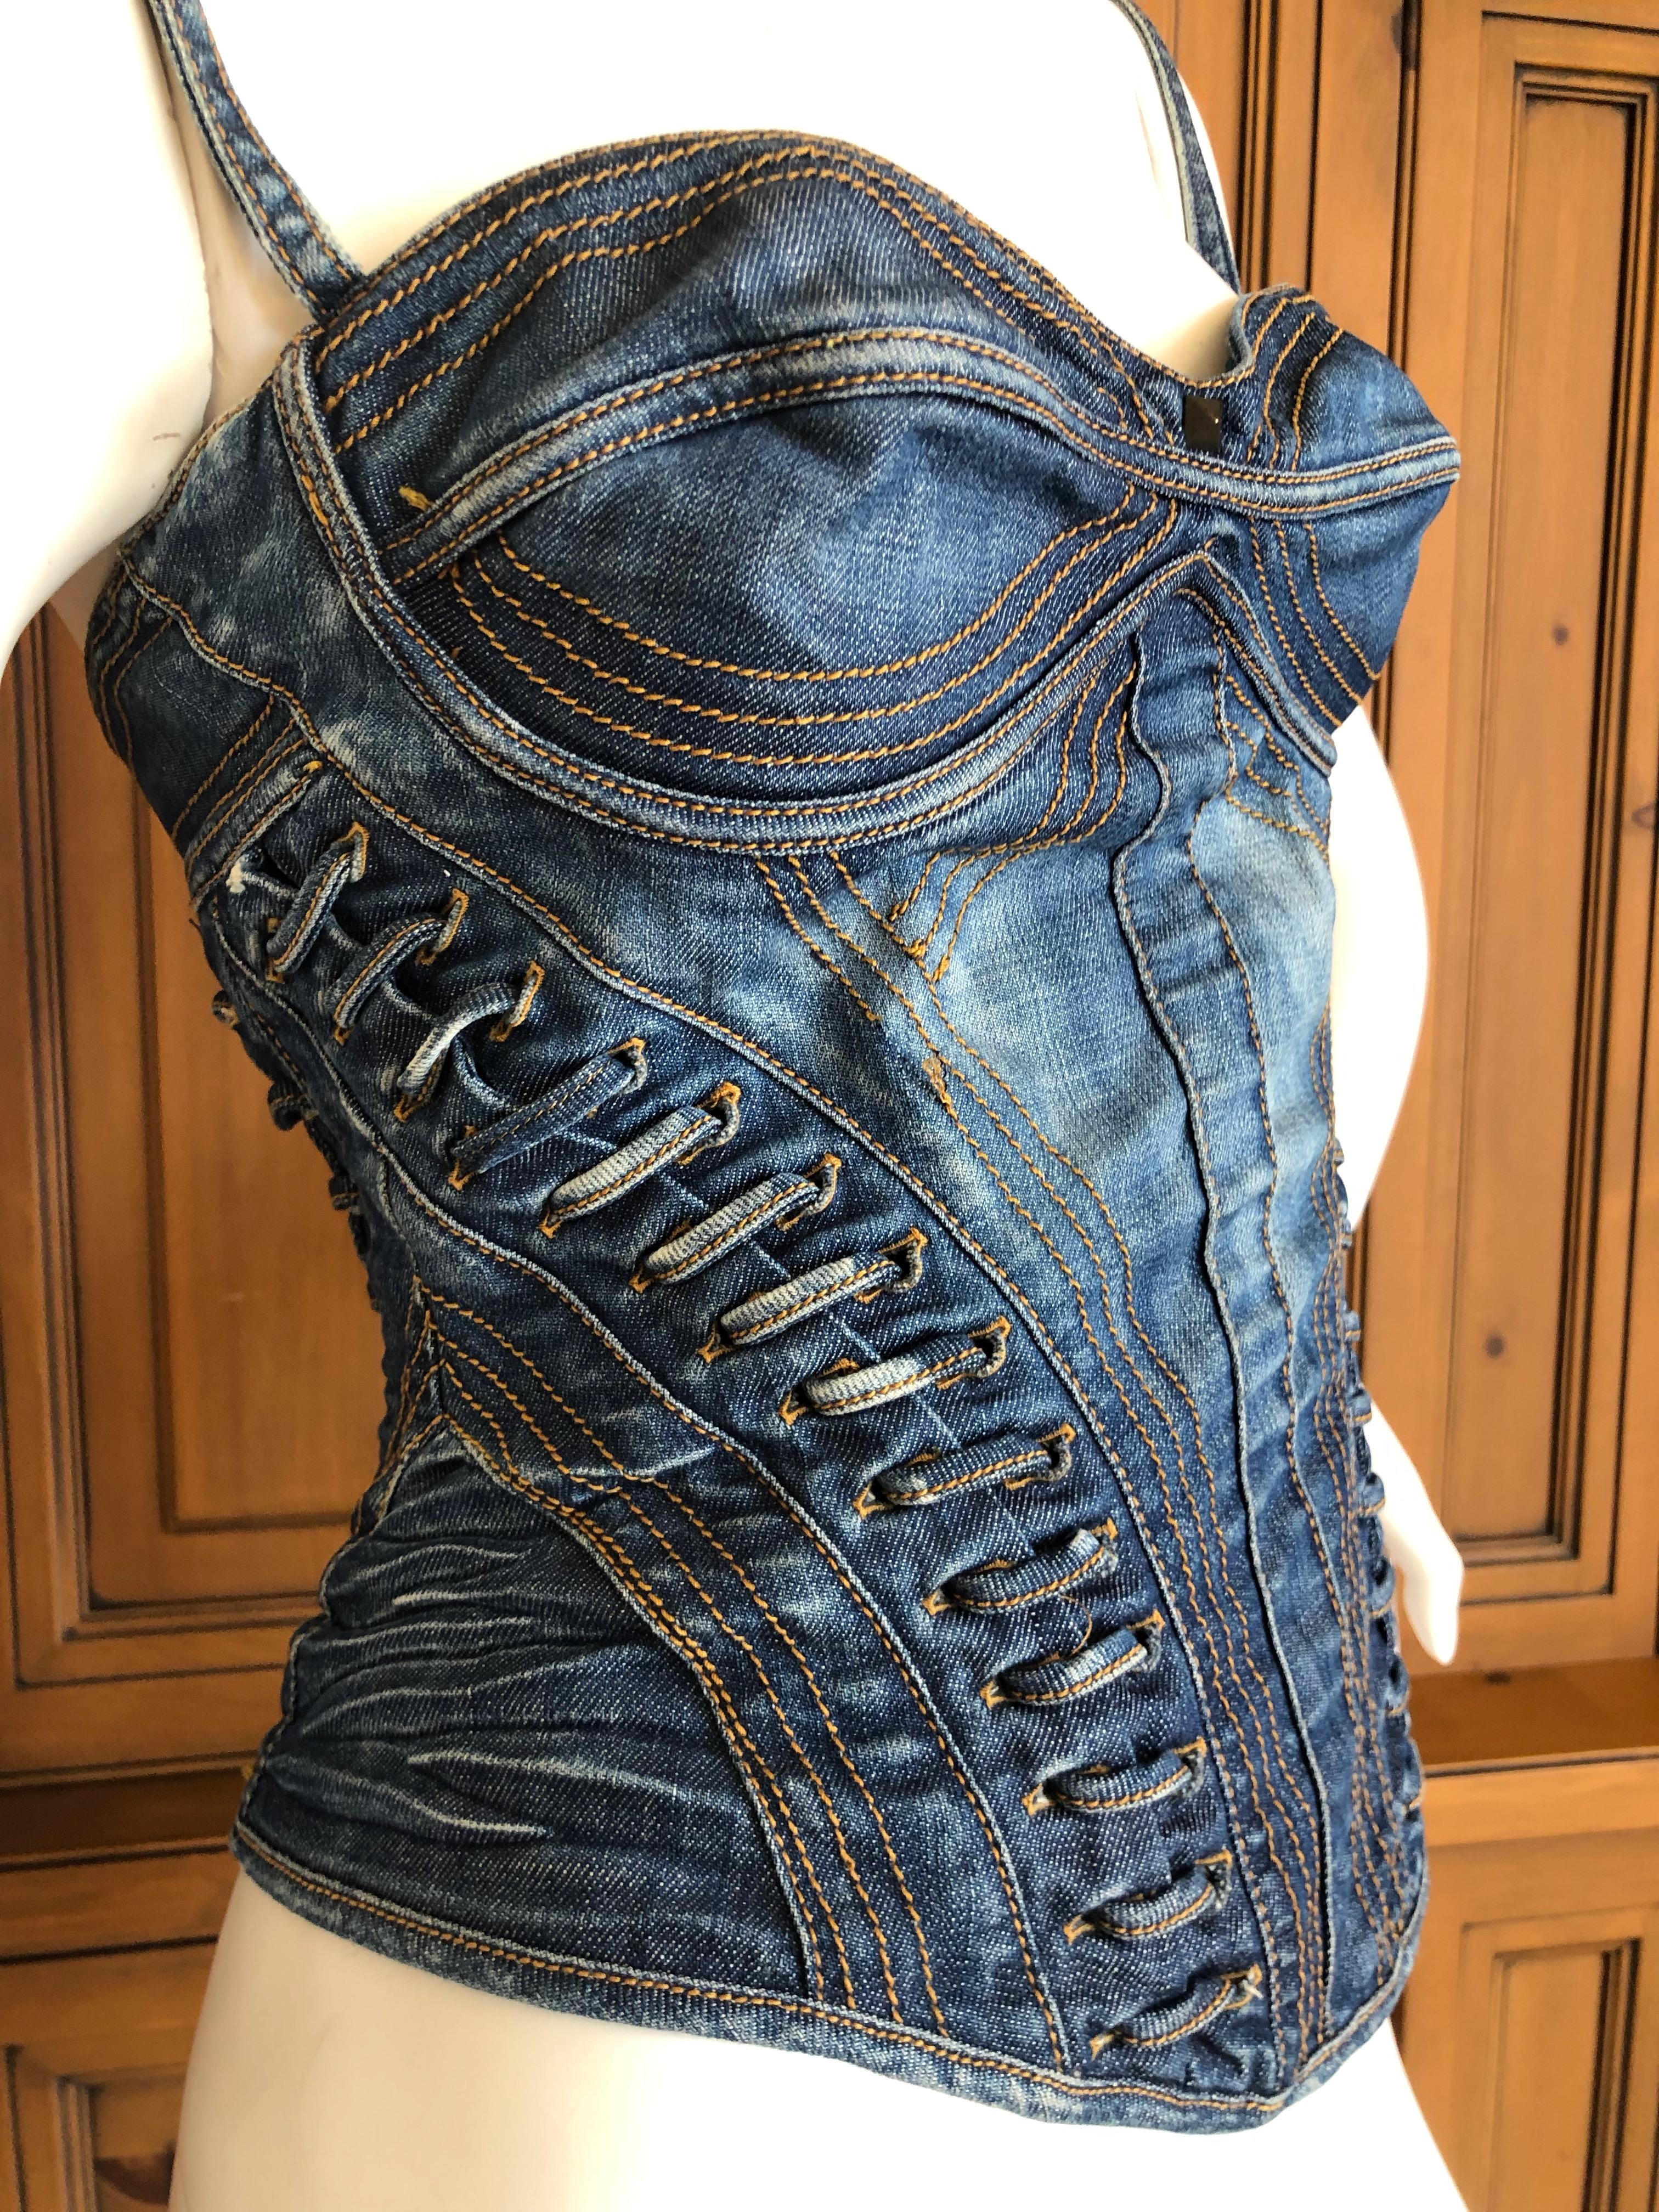 Roberto Cavalli for Just Cavalli Denim Corset with Lace Up Details
Wonderful piece , front and back.
Size 40
Bust 34